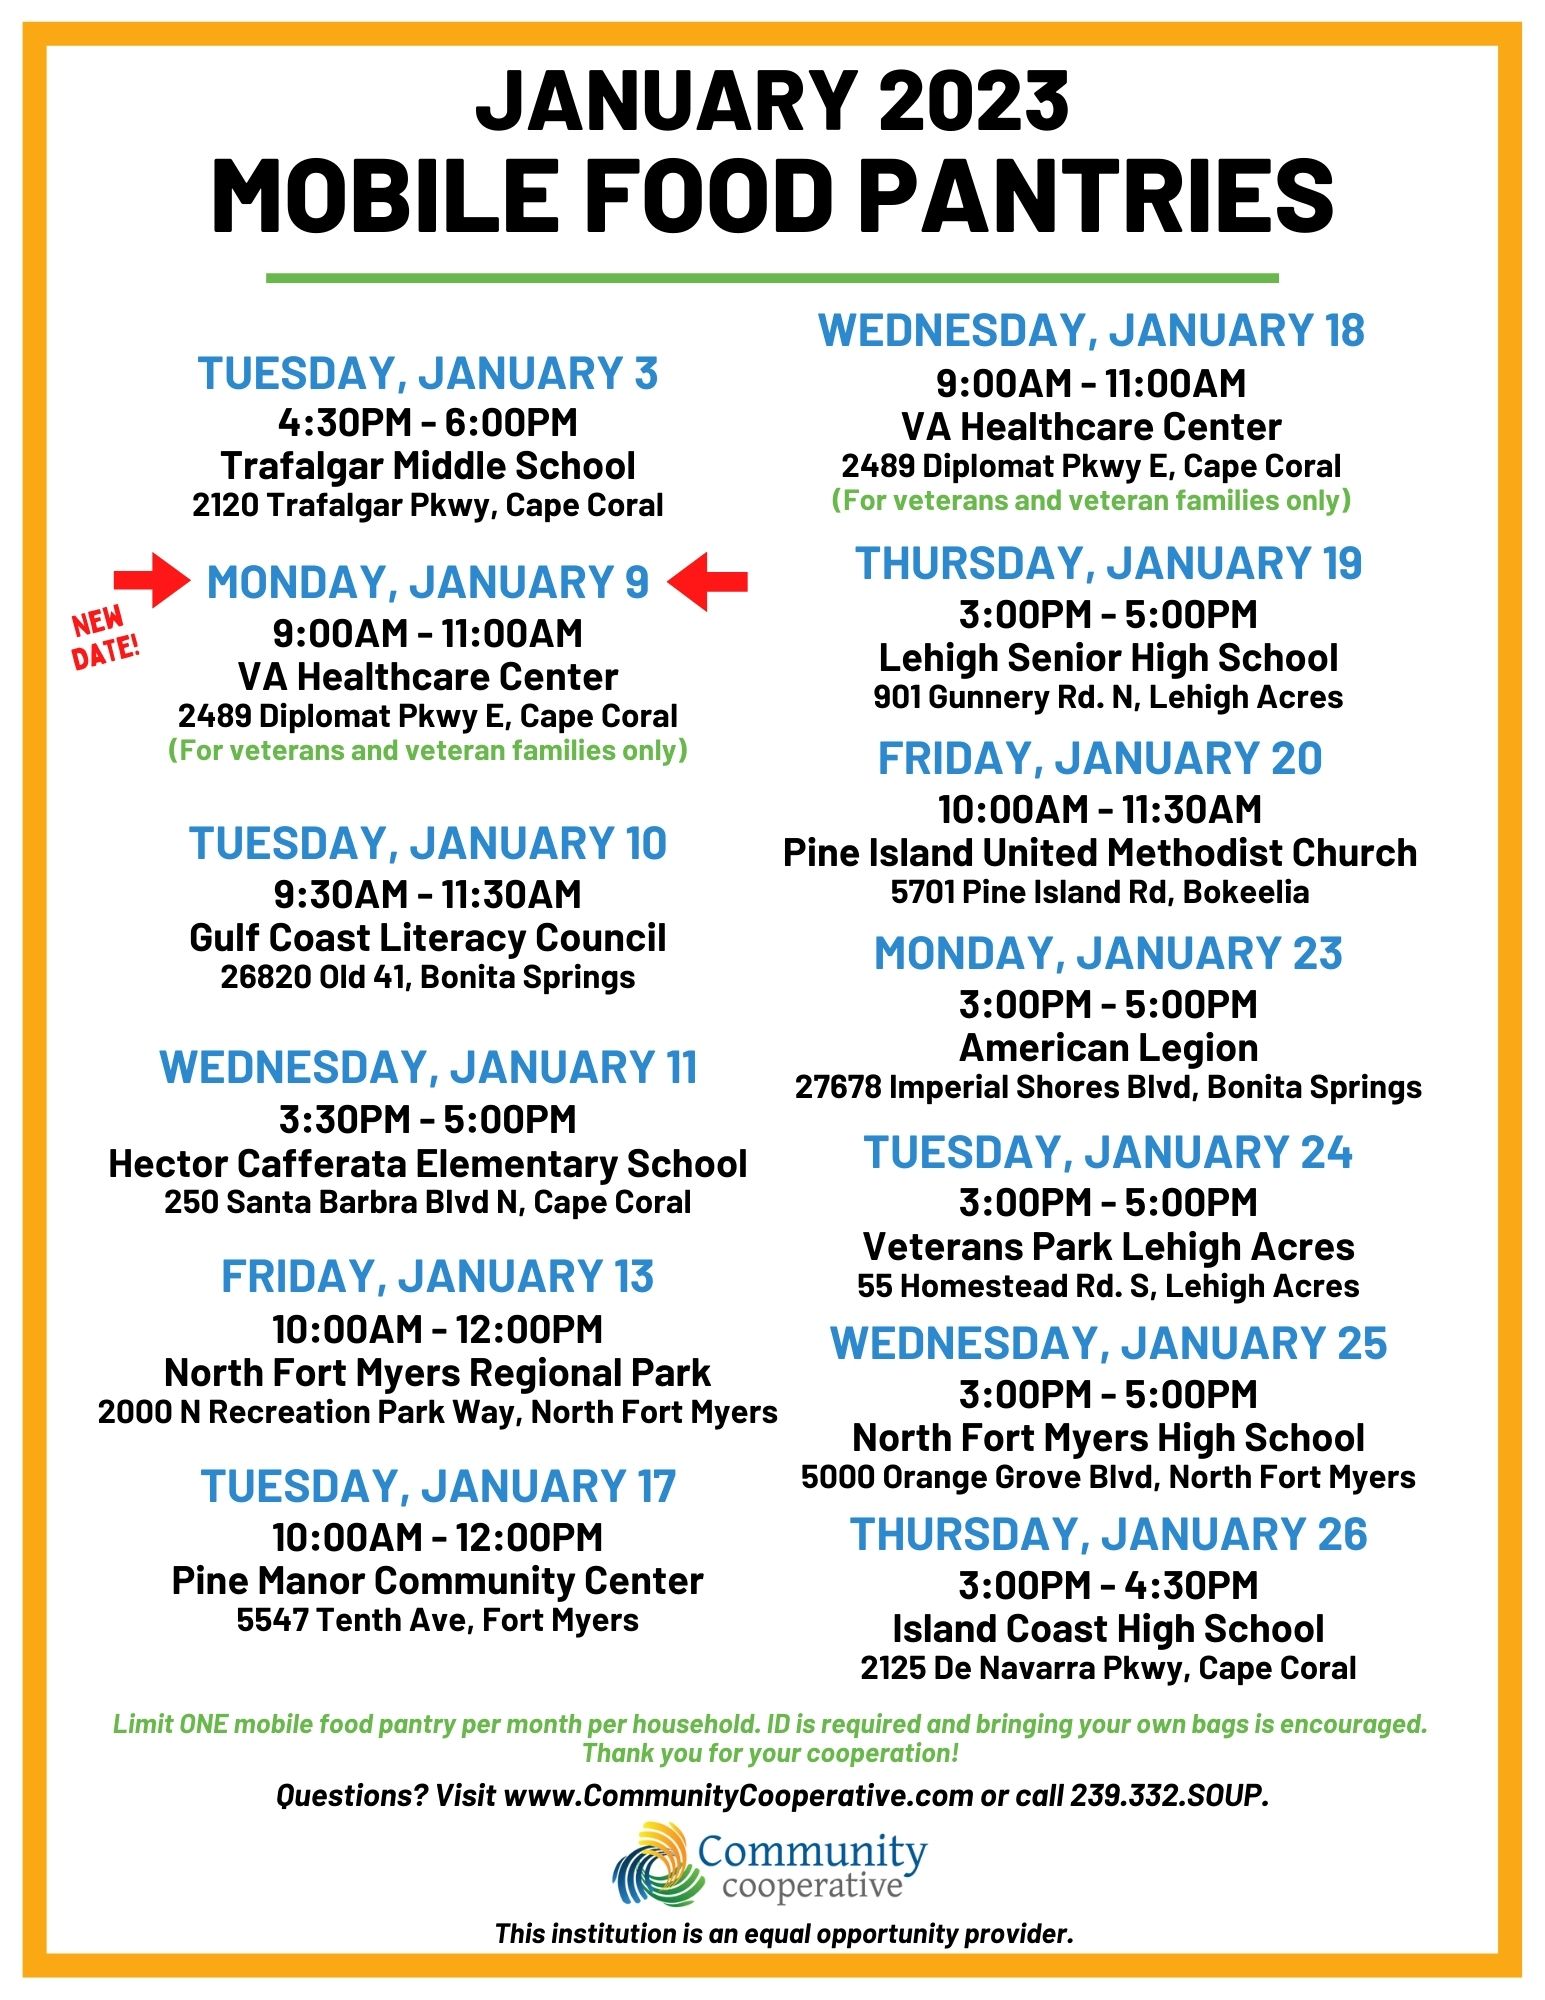 mobile food pantry schedule